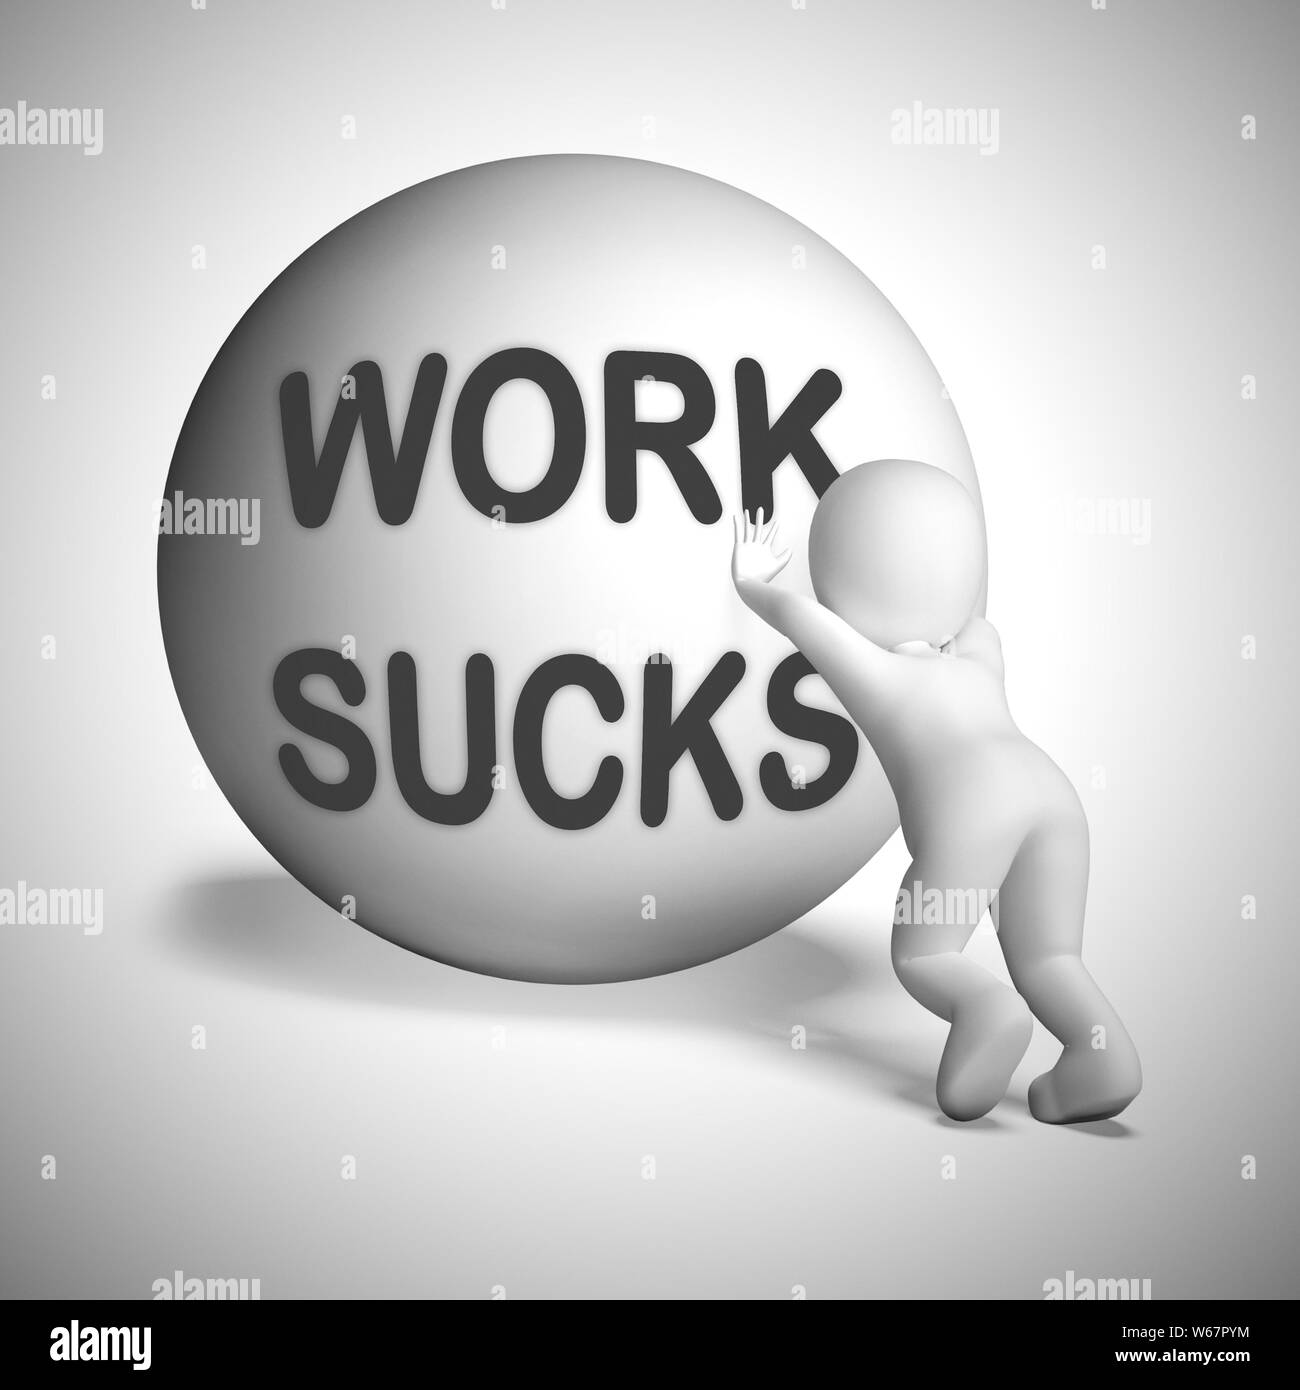 Work sucks idiom means you hate or really dislike your company. Loathing order detesting a professional - 3d illustration Stock Photo